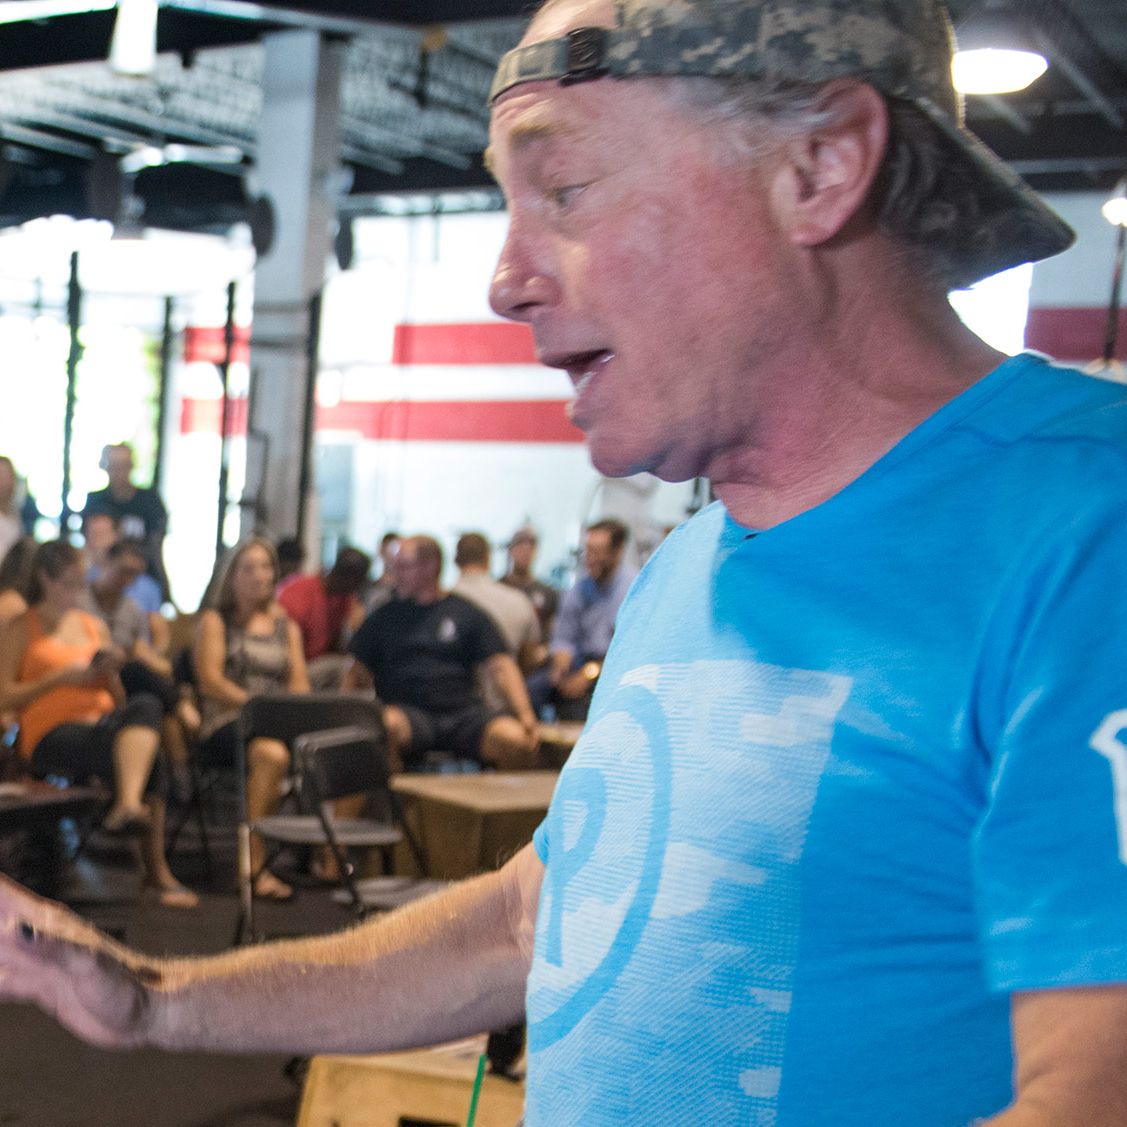 Crossfit Ceo Greg Glassman Resigns After Racist Remarks